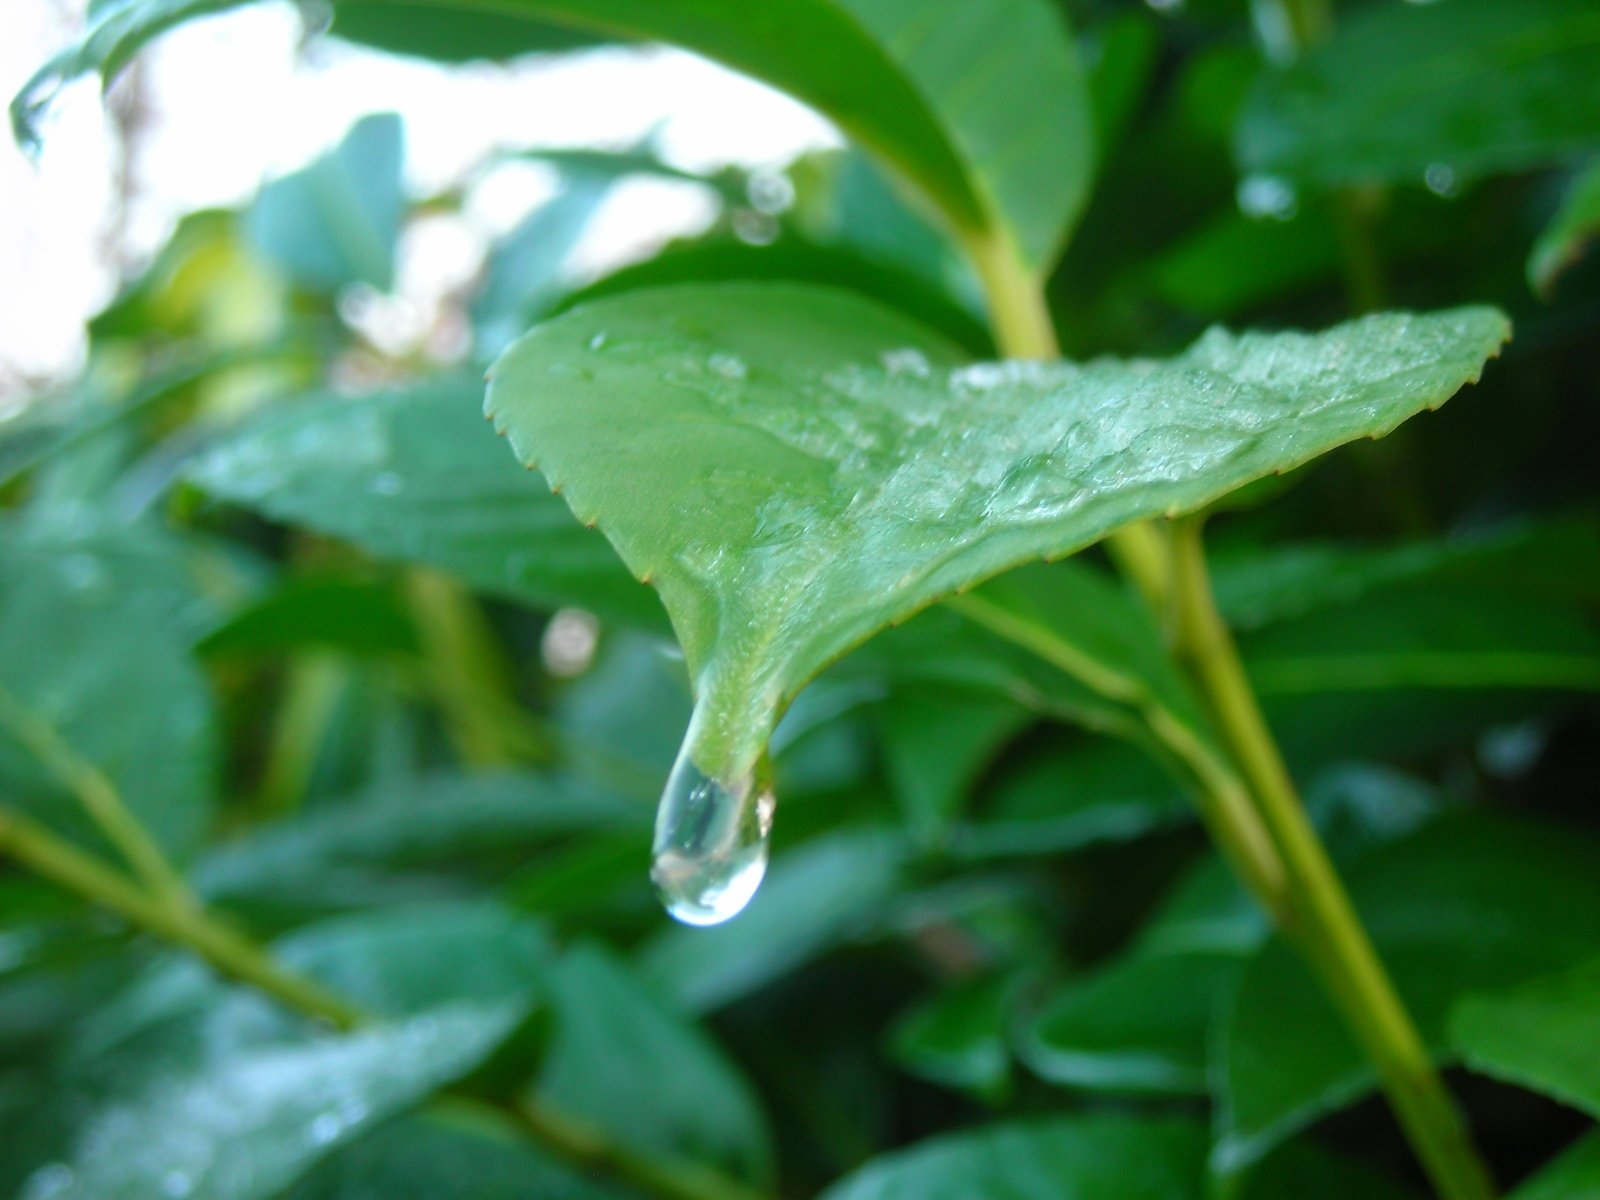 a green leaf is pictured with water drops on it